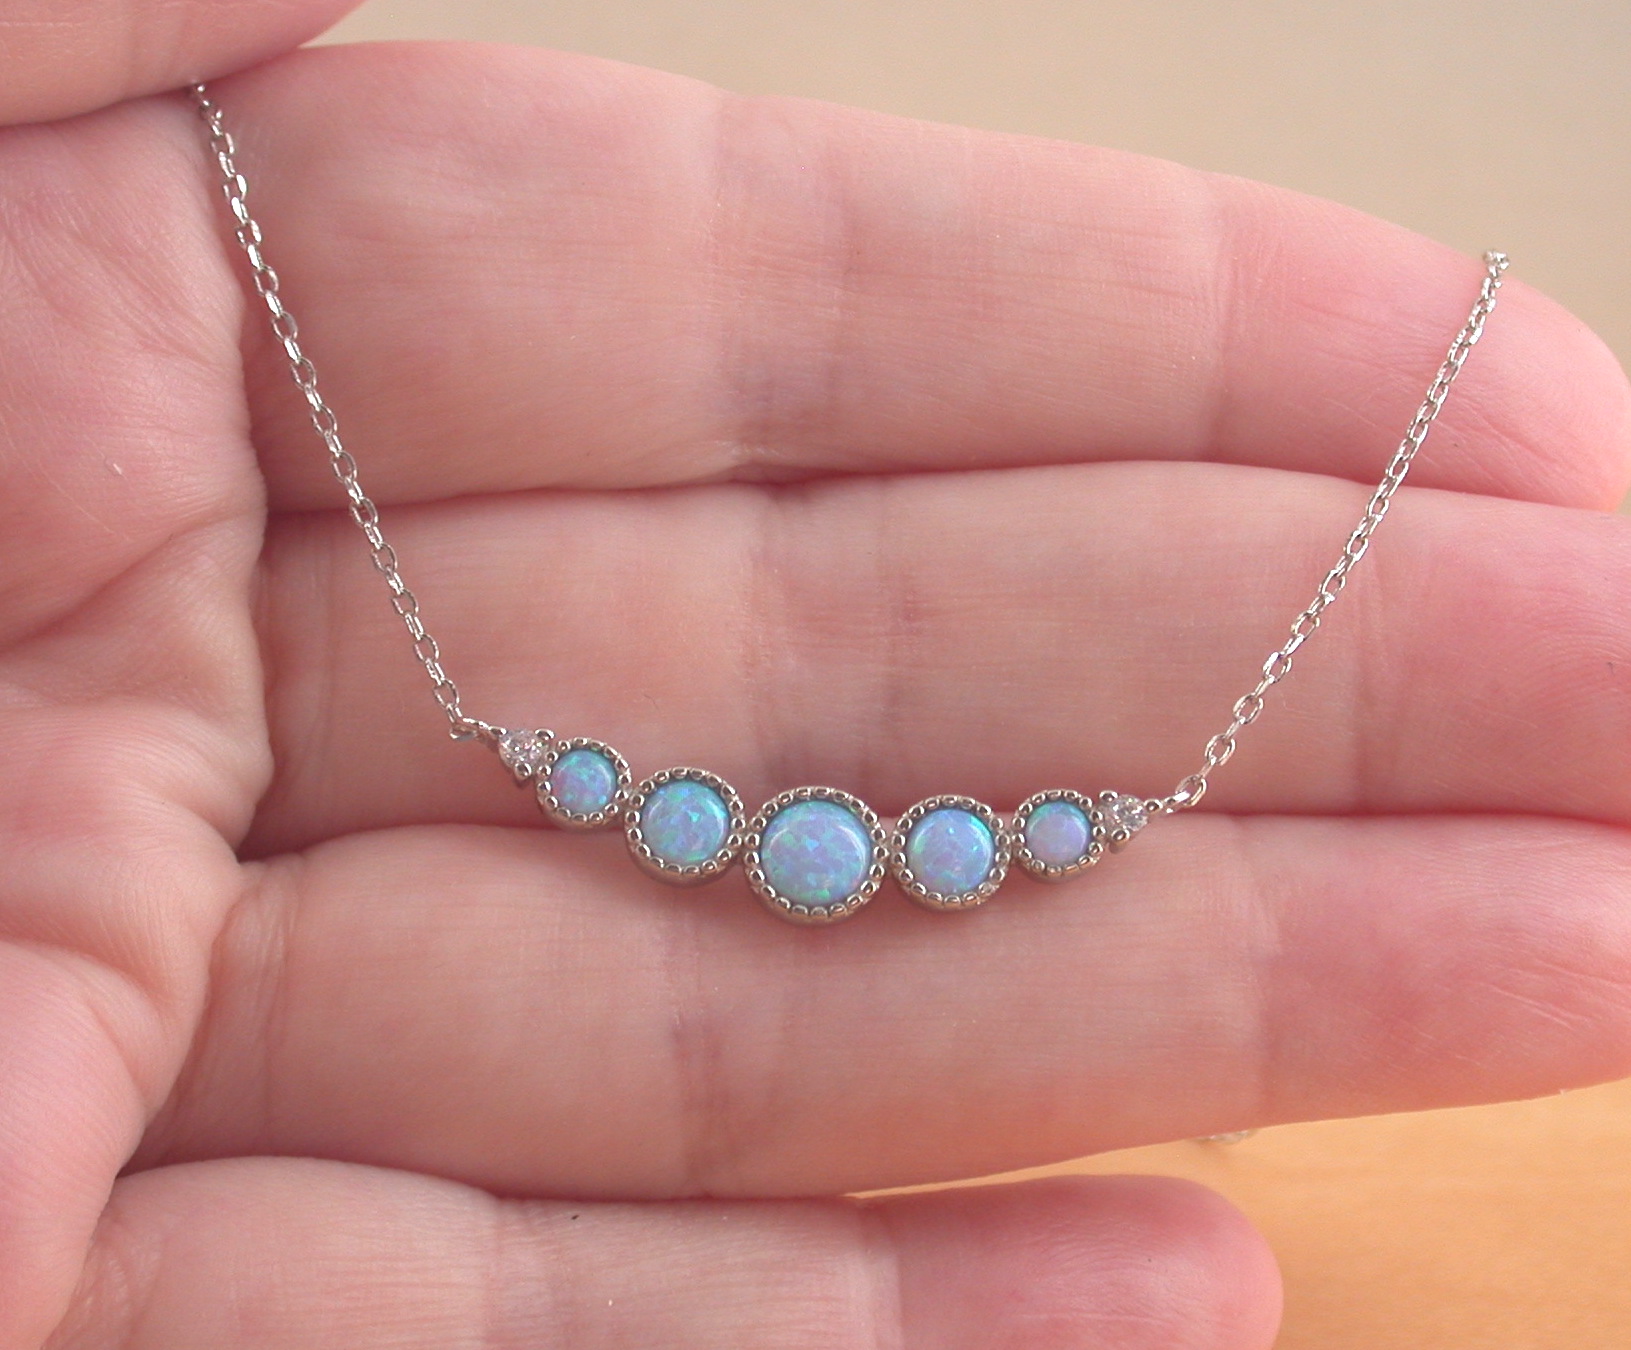 Crystal Opal, Aquamarine & Pearl Necklace | 2 strands - 26